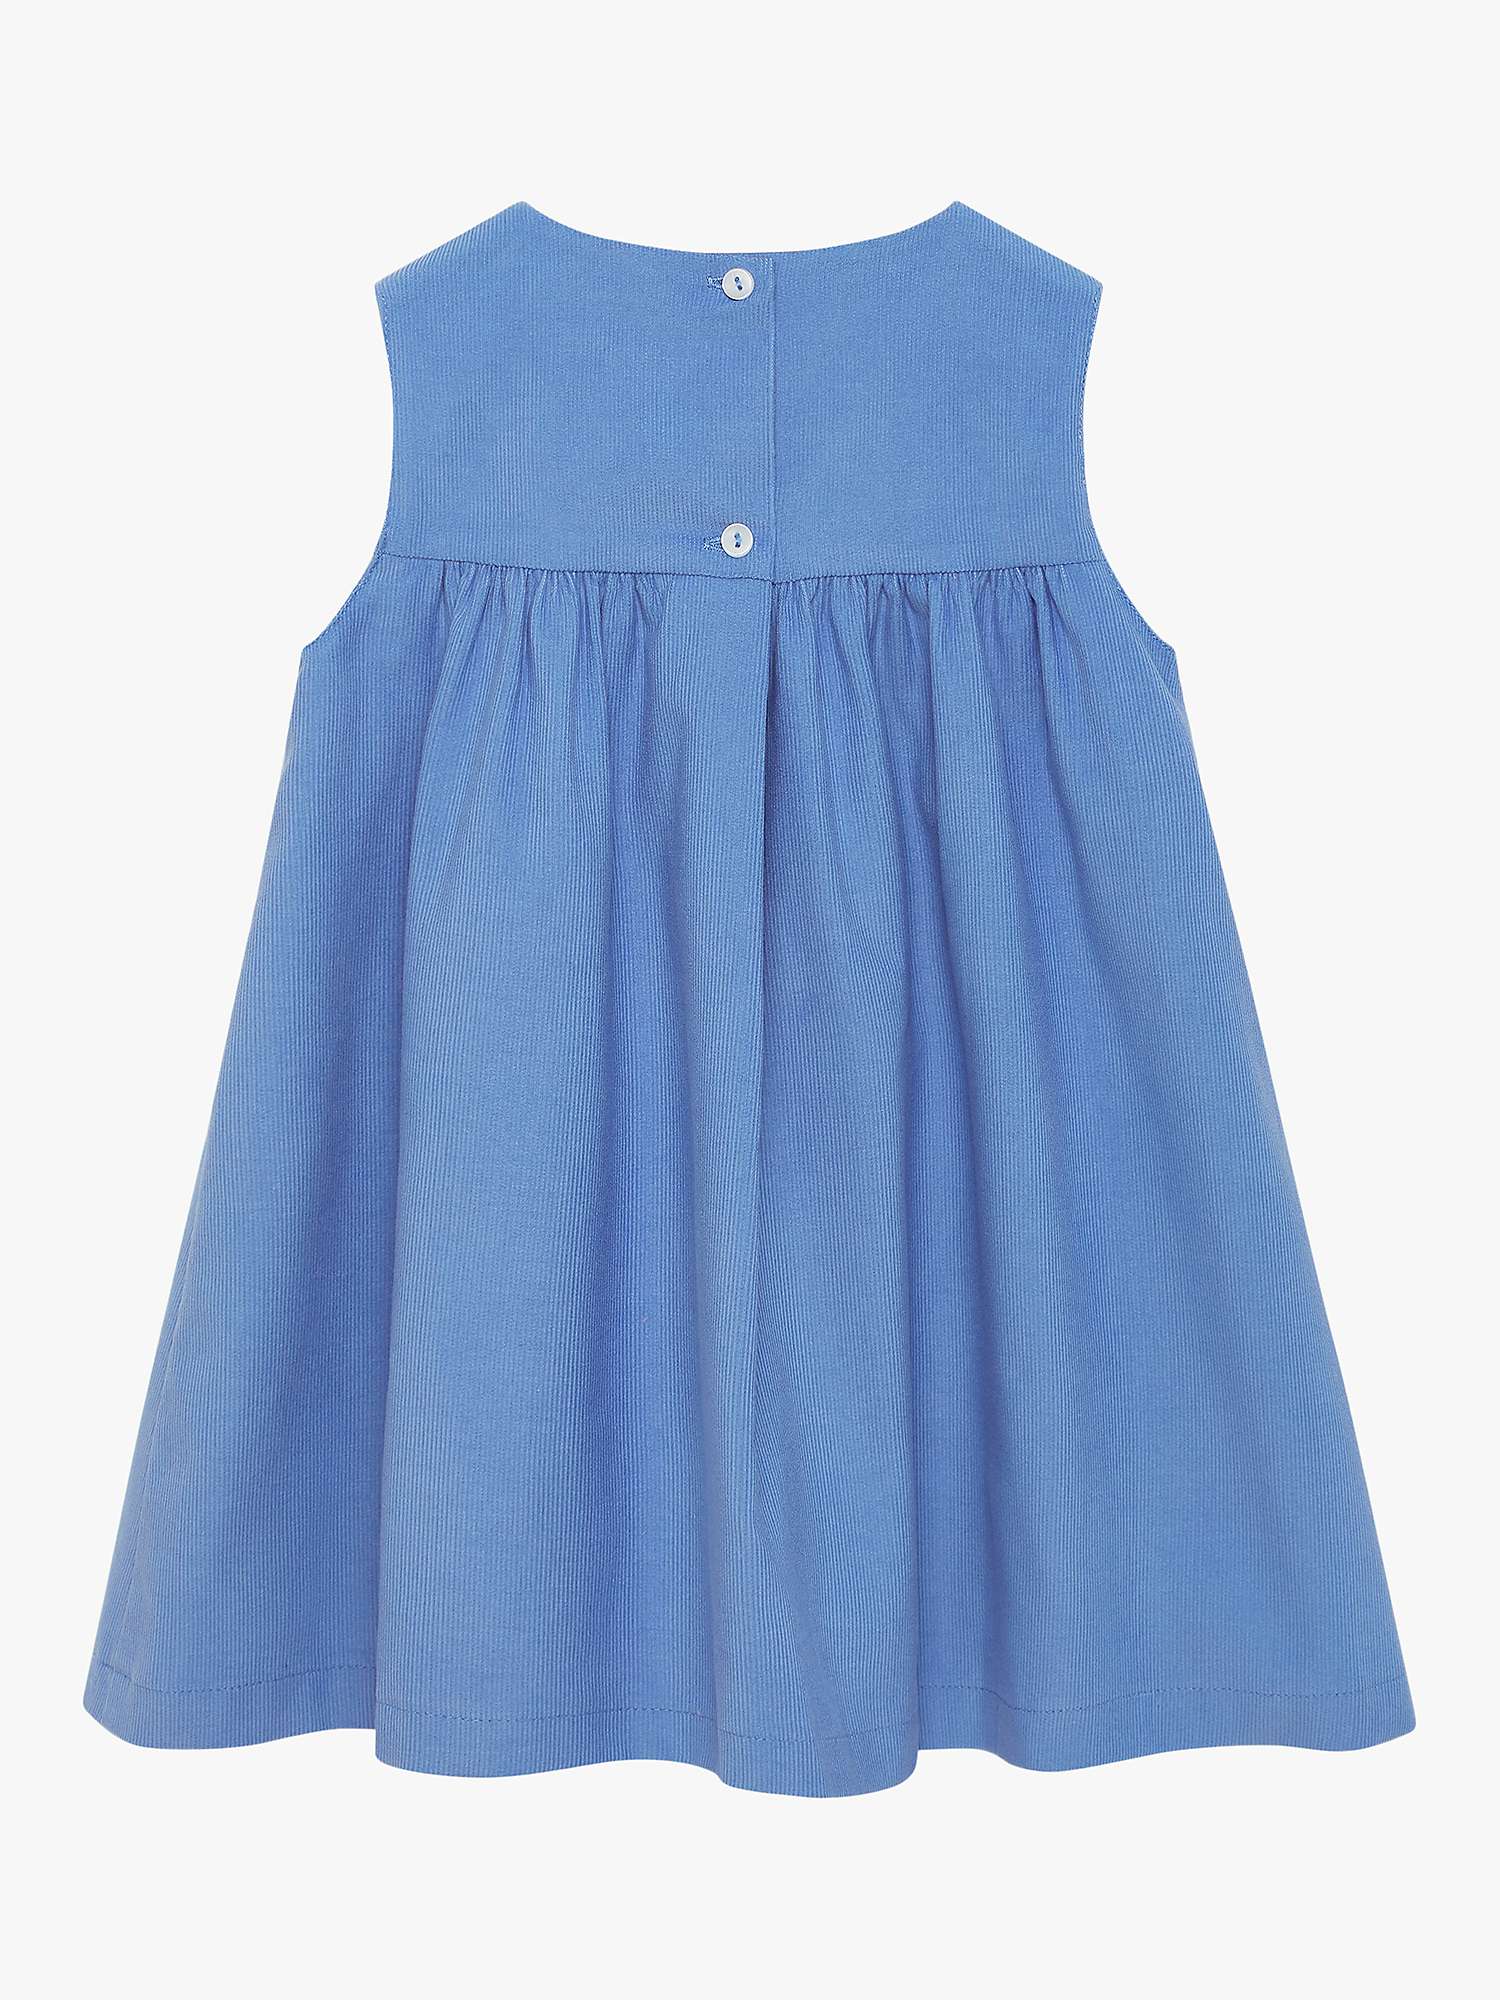 Buy Trotters Confiture Baby Jemima Duck Smocked Pinafore Dress Online at johnlewis.com